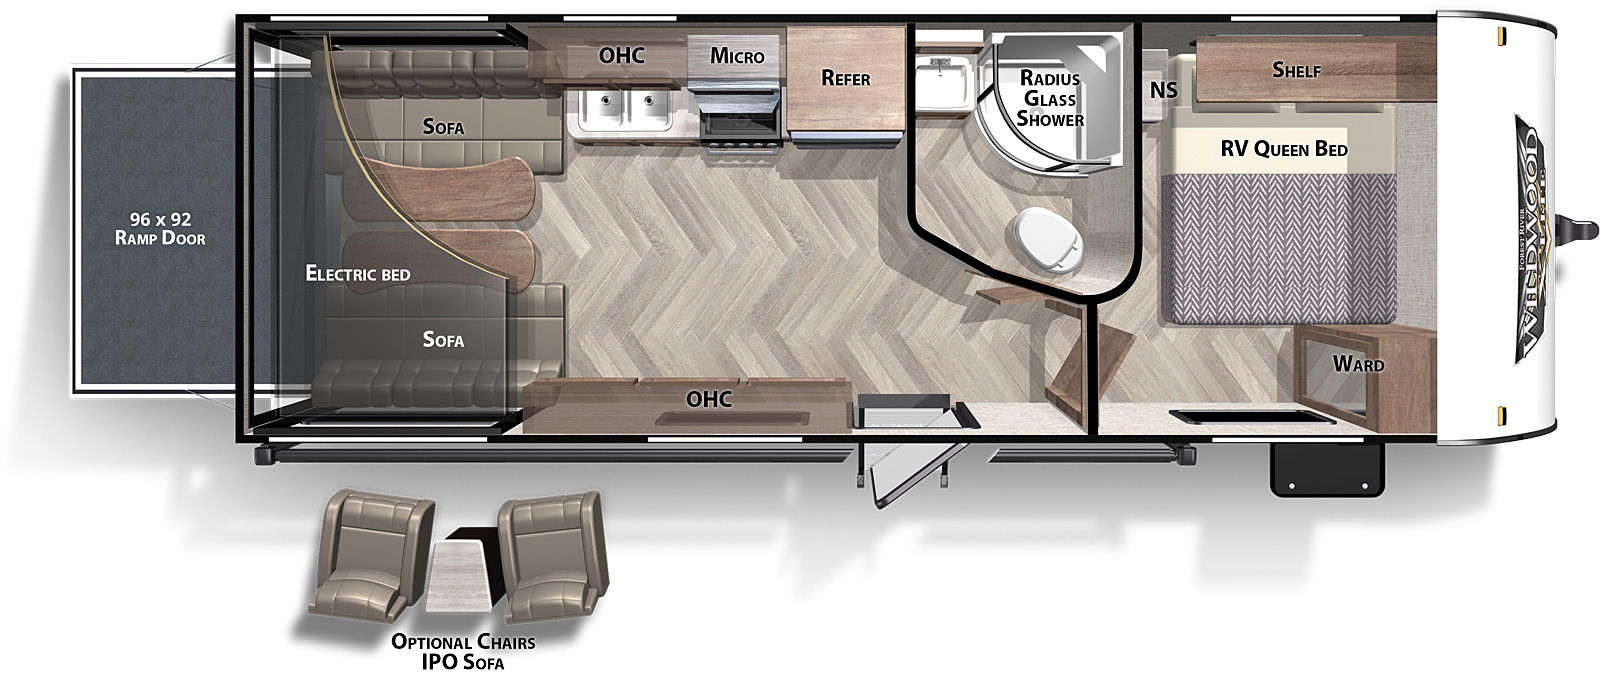 X-Lite Northwest 211SSXL floorplan. The 211SSXL has no slide outs and one entry door.